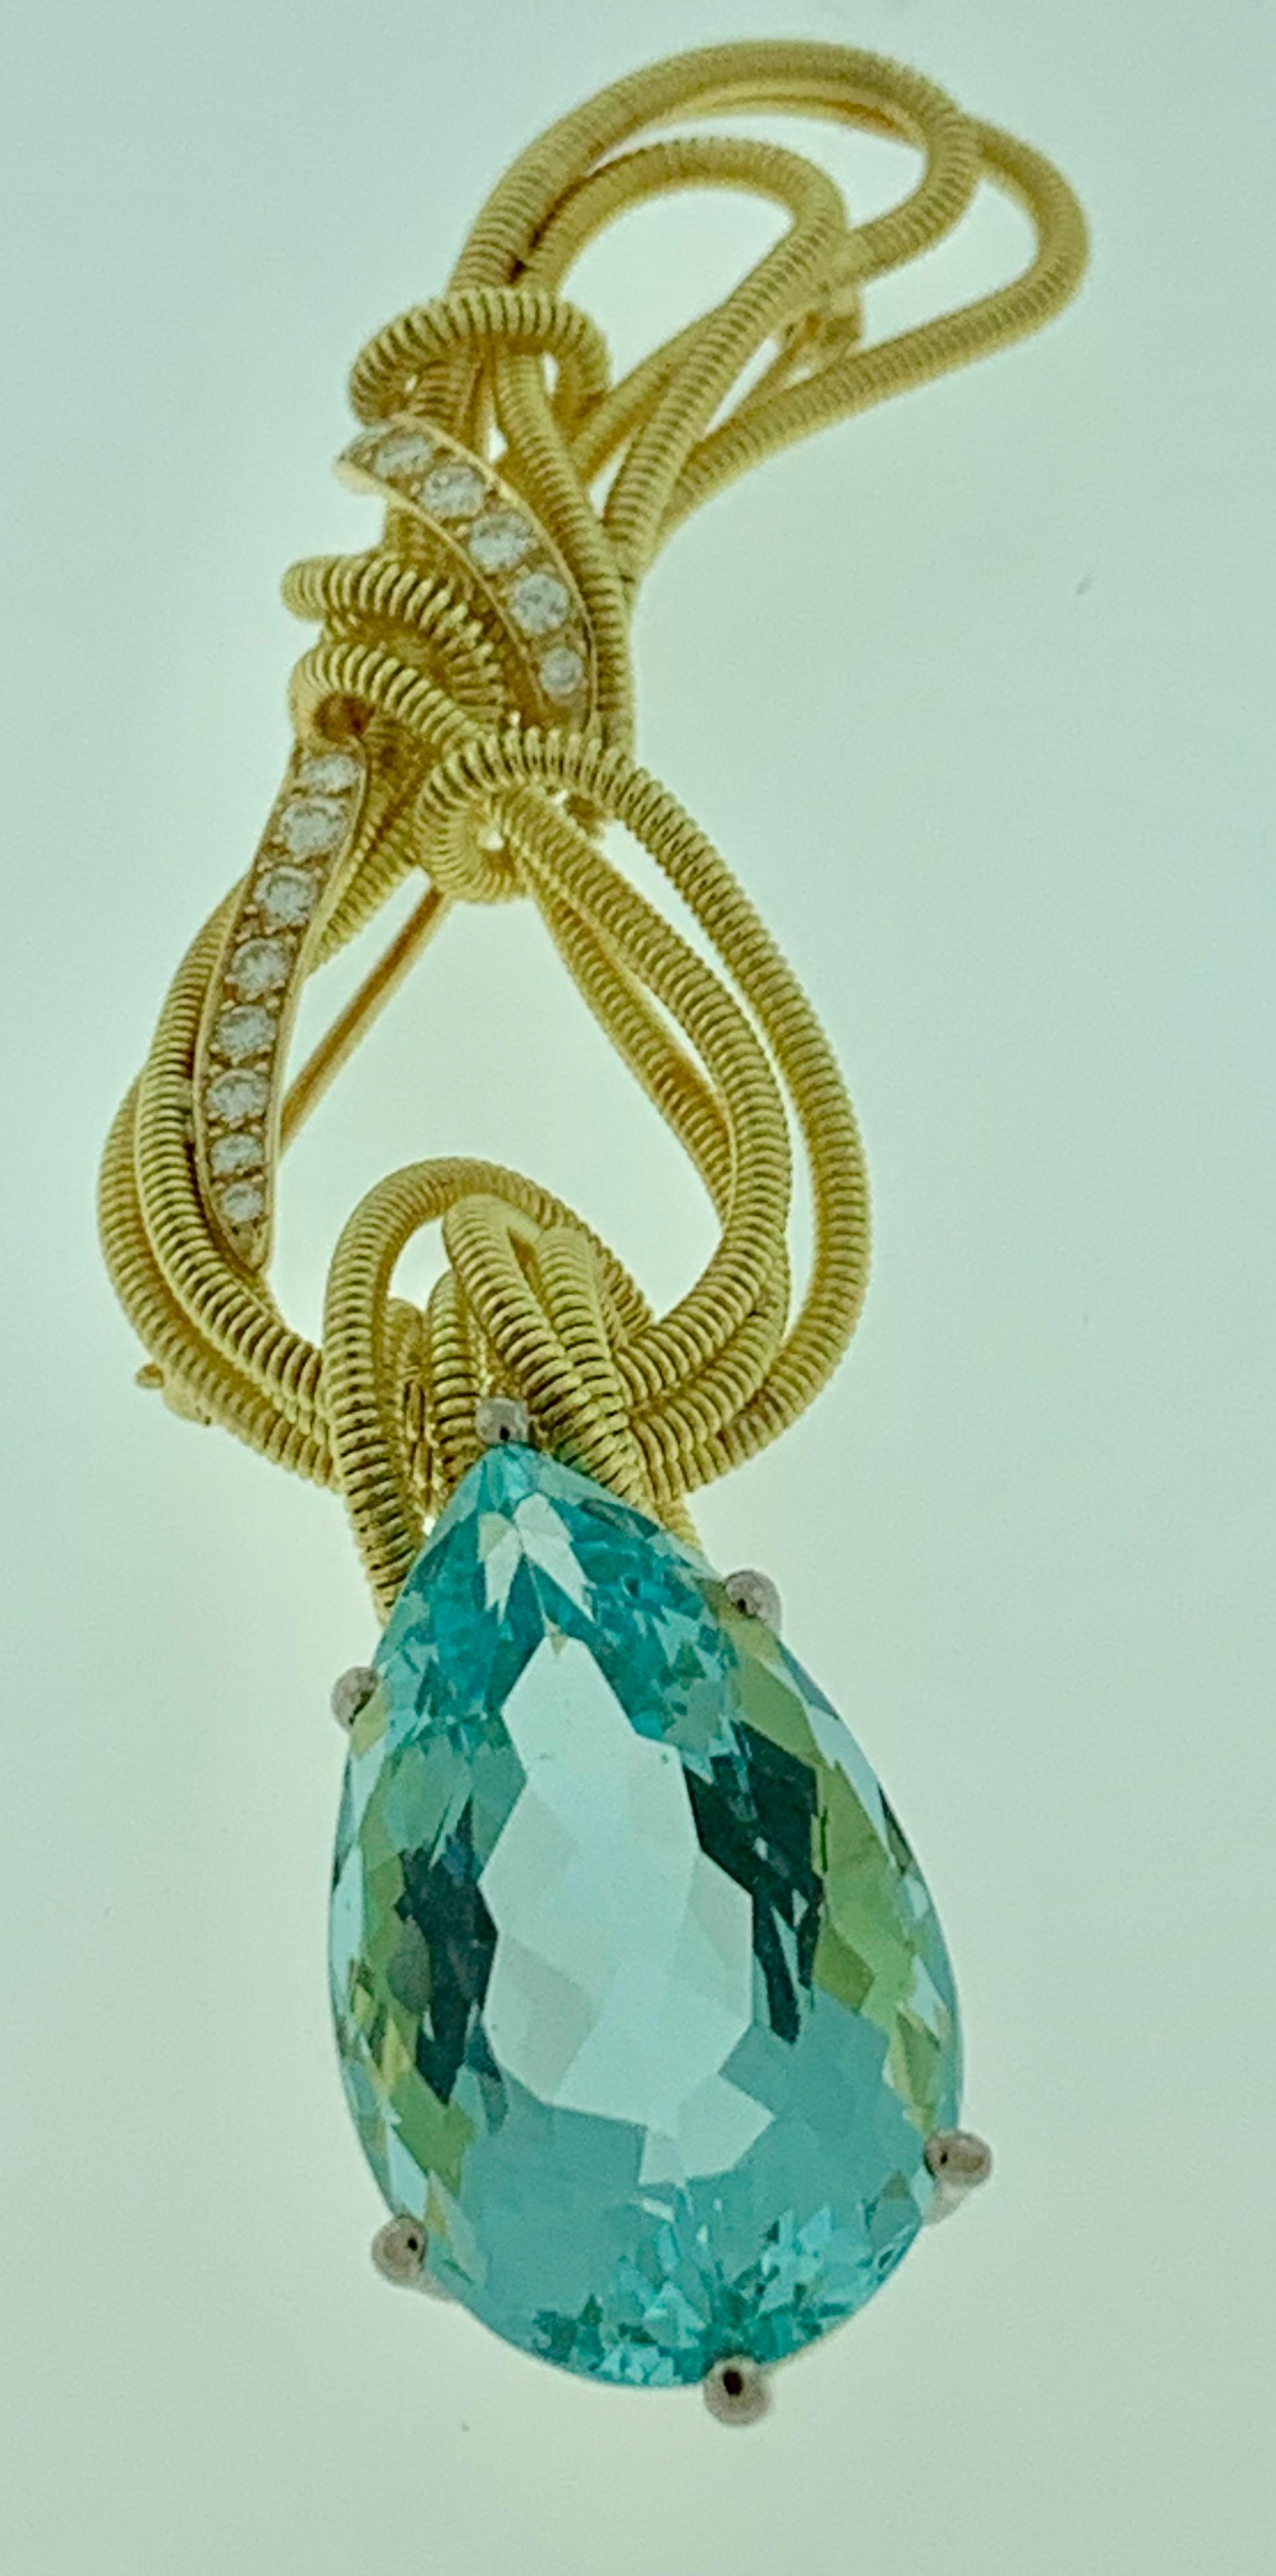  26 Carat  Aquamarine  &  Diamond Pendant /Pin  In 18K Yellow Gold  by Designer Gloria Bass

This spectacular Pendant Necklace  consisting of a single Pear cut  Aquamarine approximately  26 Carat.  
The  Aquamarine   is  a drop from 18 Karat yellow